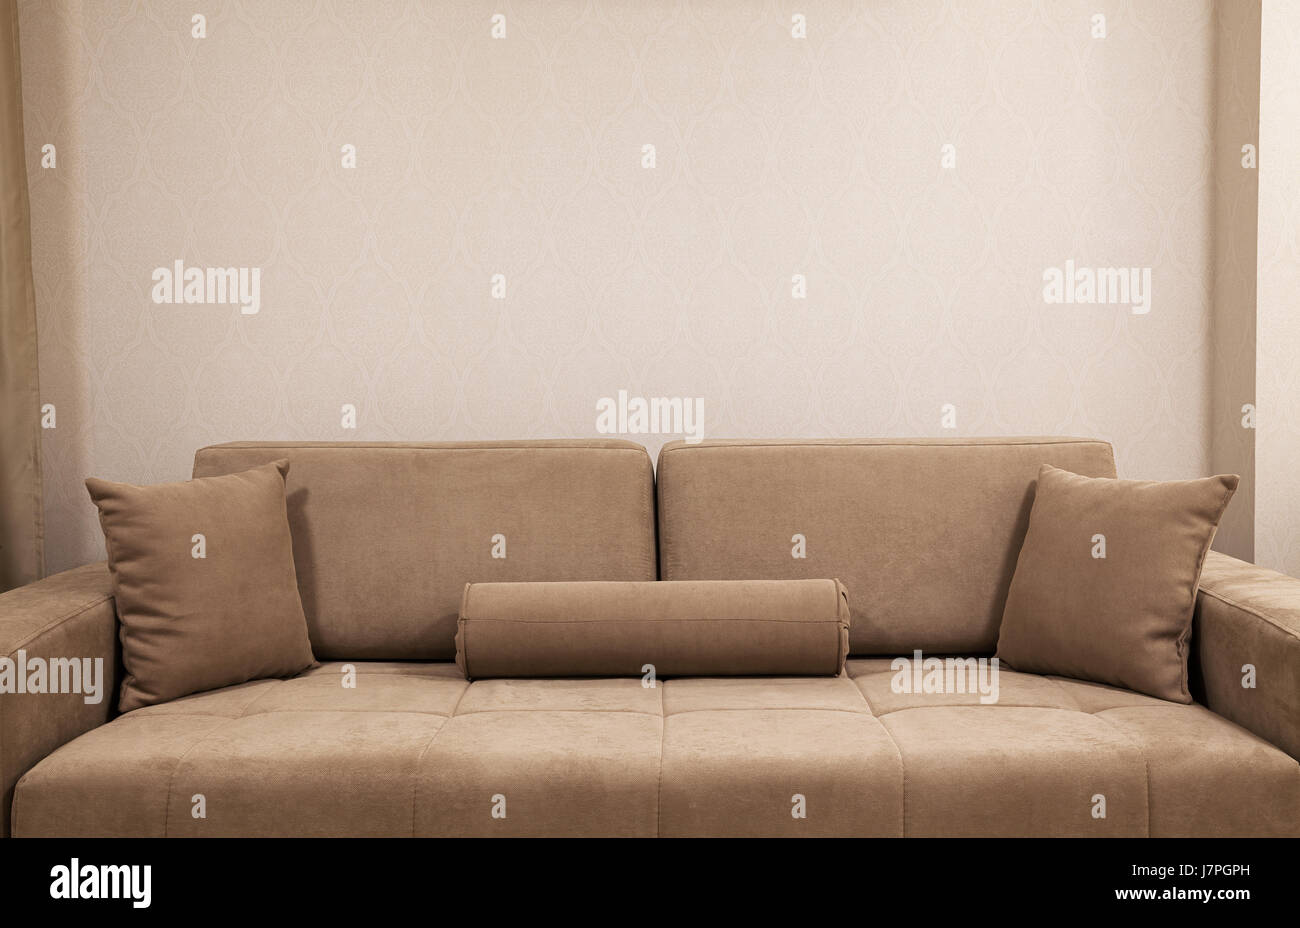 Modern and new couch in front of wall with decorative wallpapers. Stock Photo